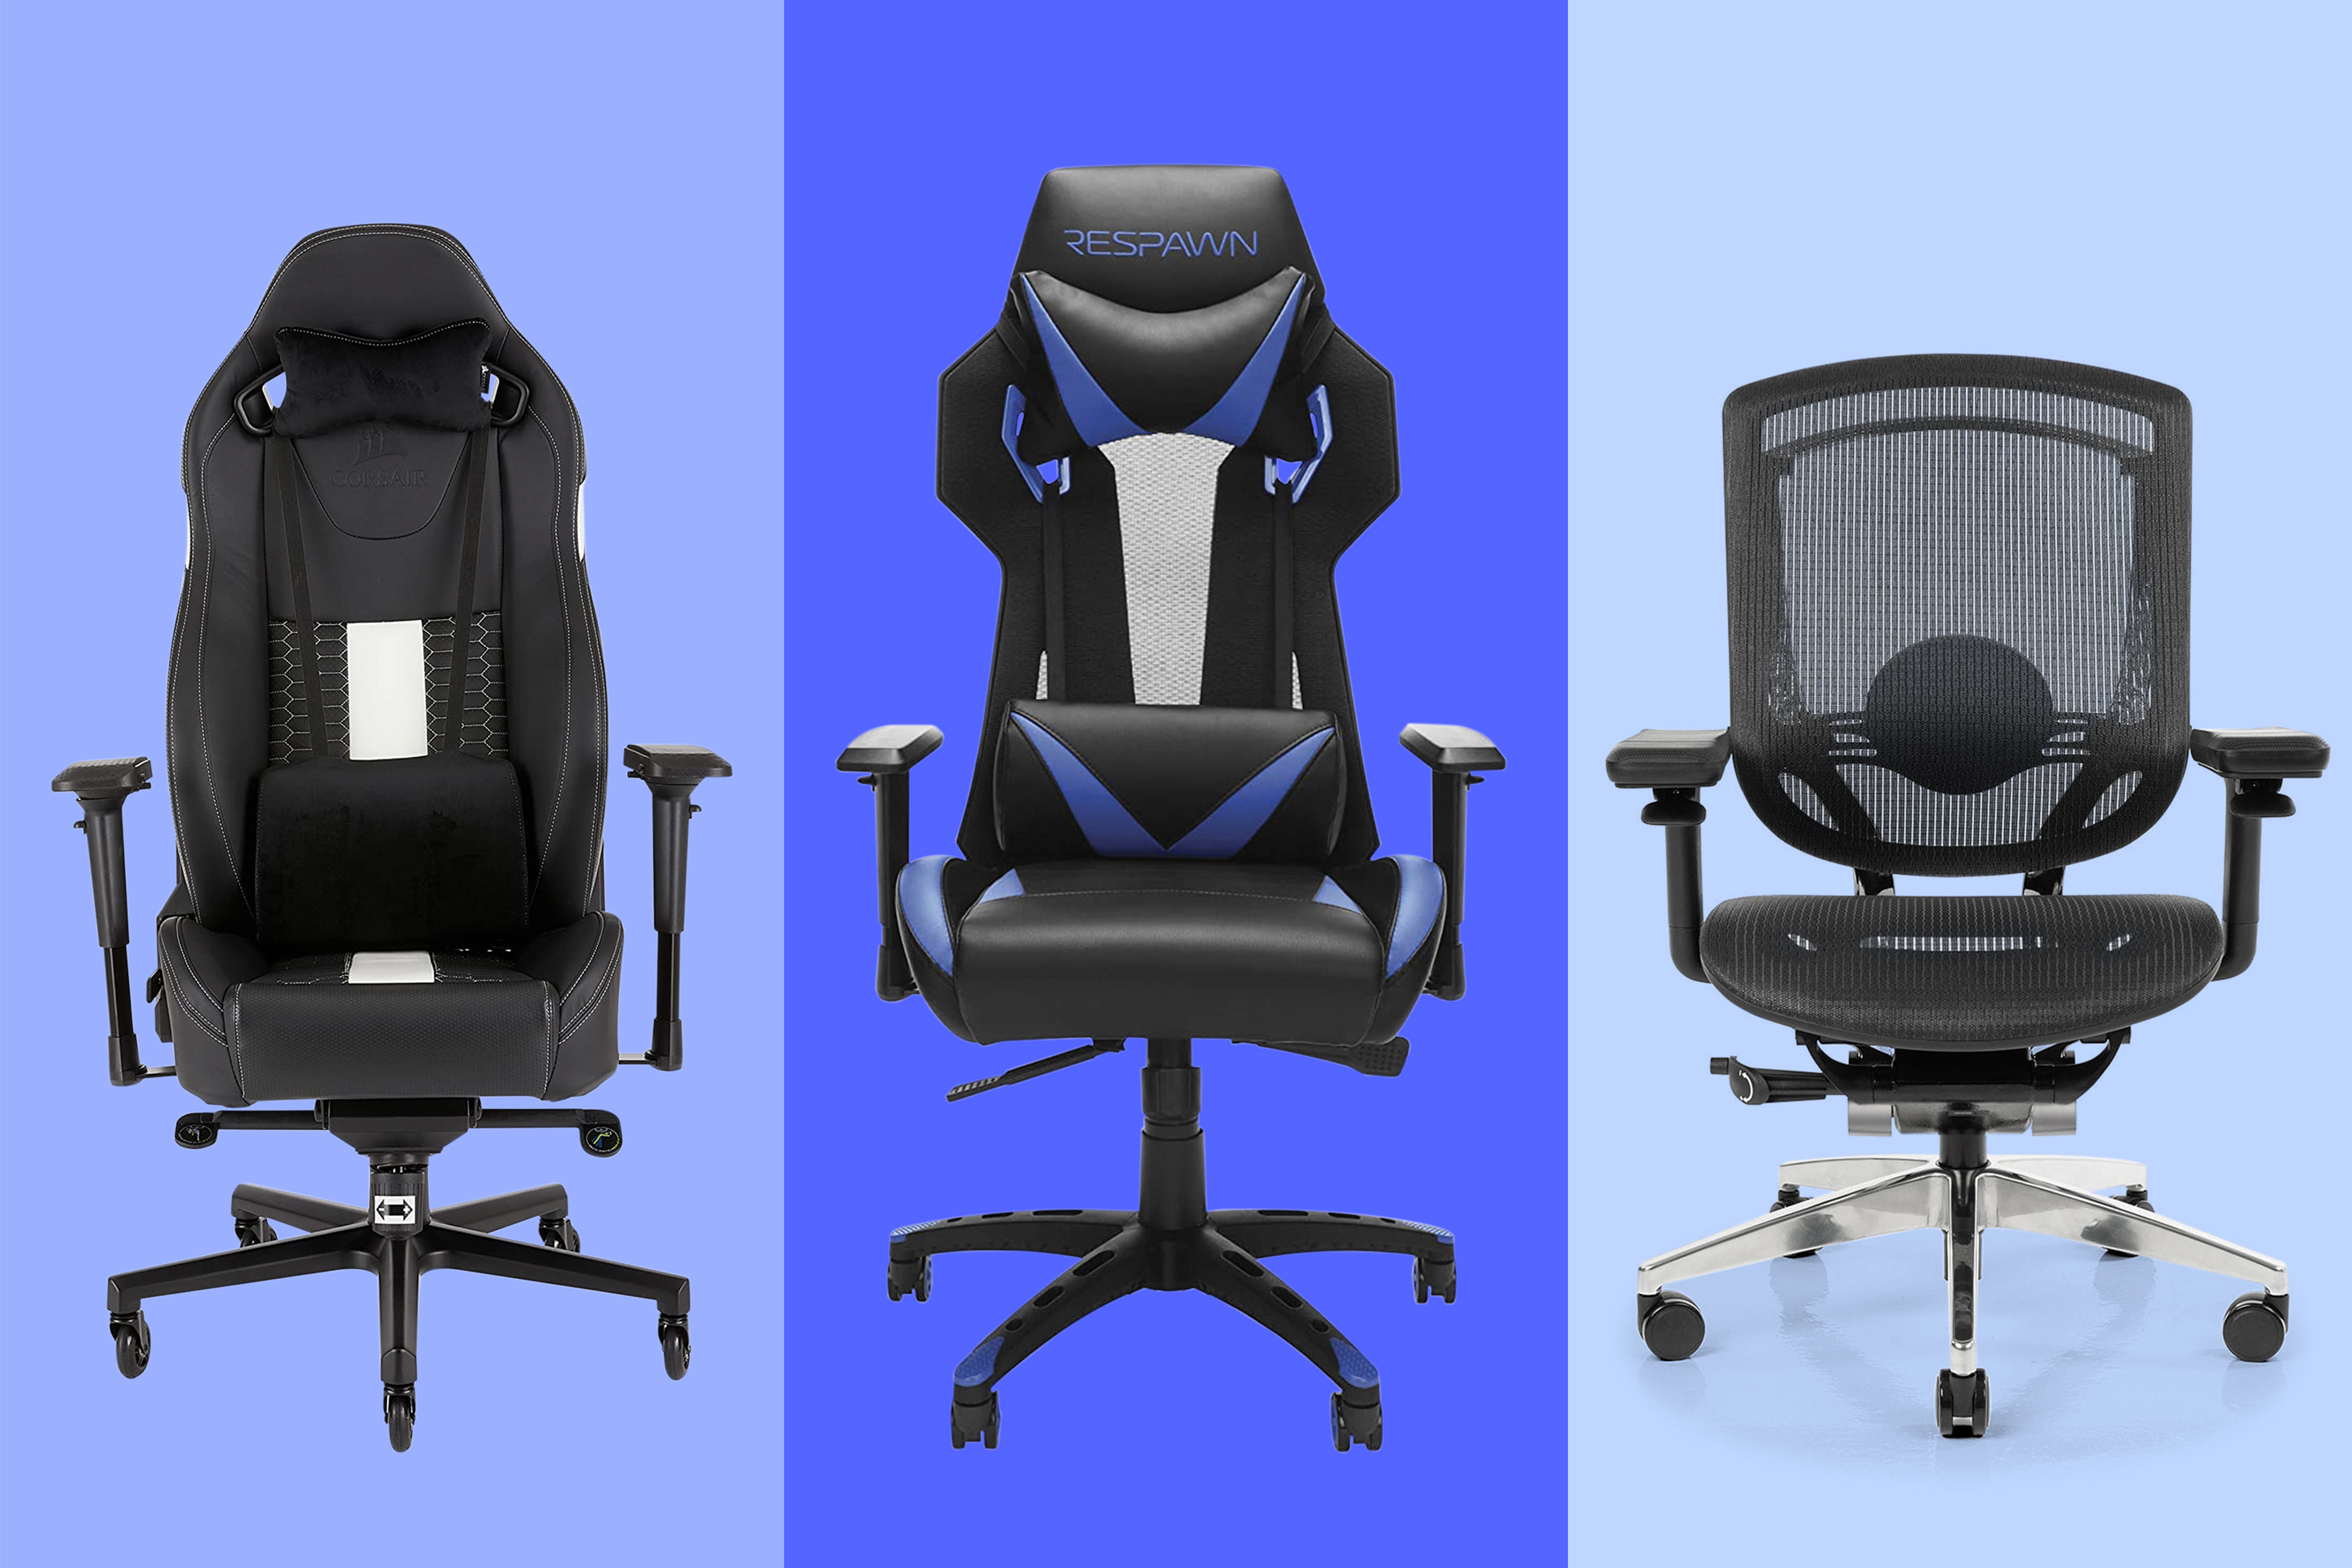 The Best Gaming Chairs for Your Money